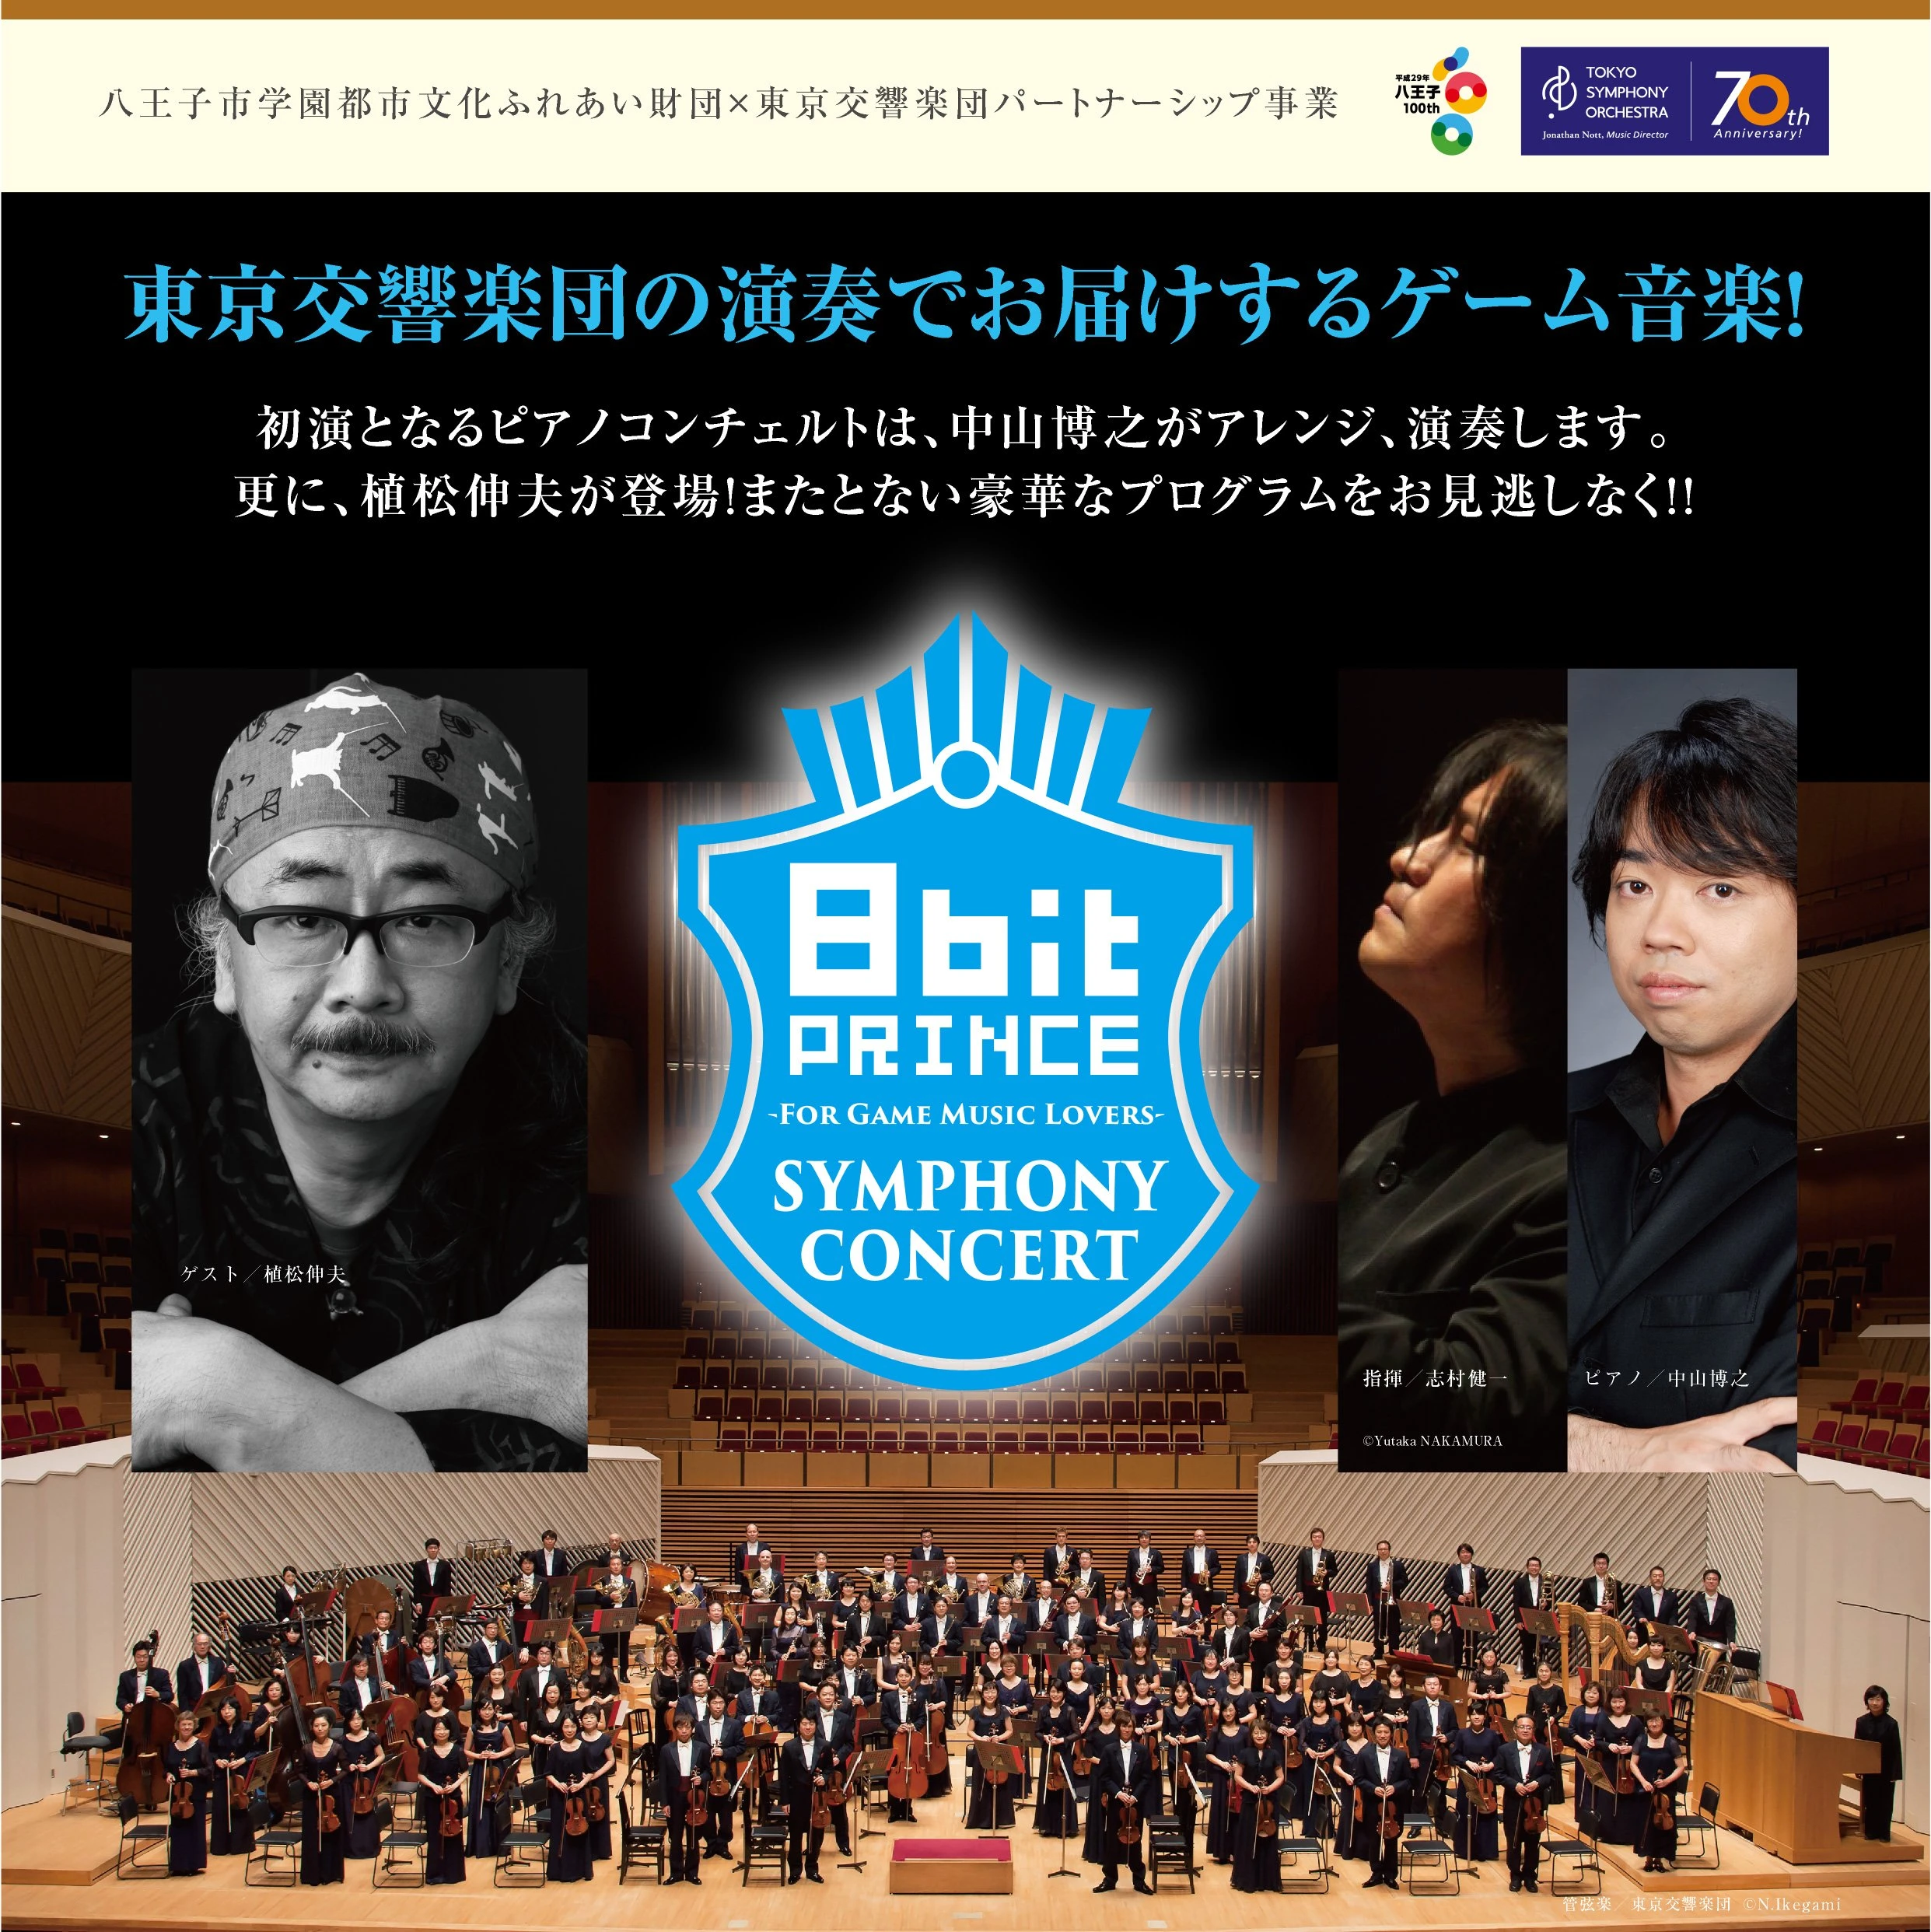 8bit Prince Symphony Concert -For Game Music Lovers-